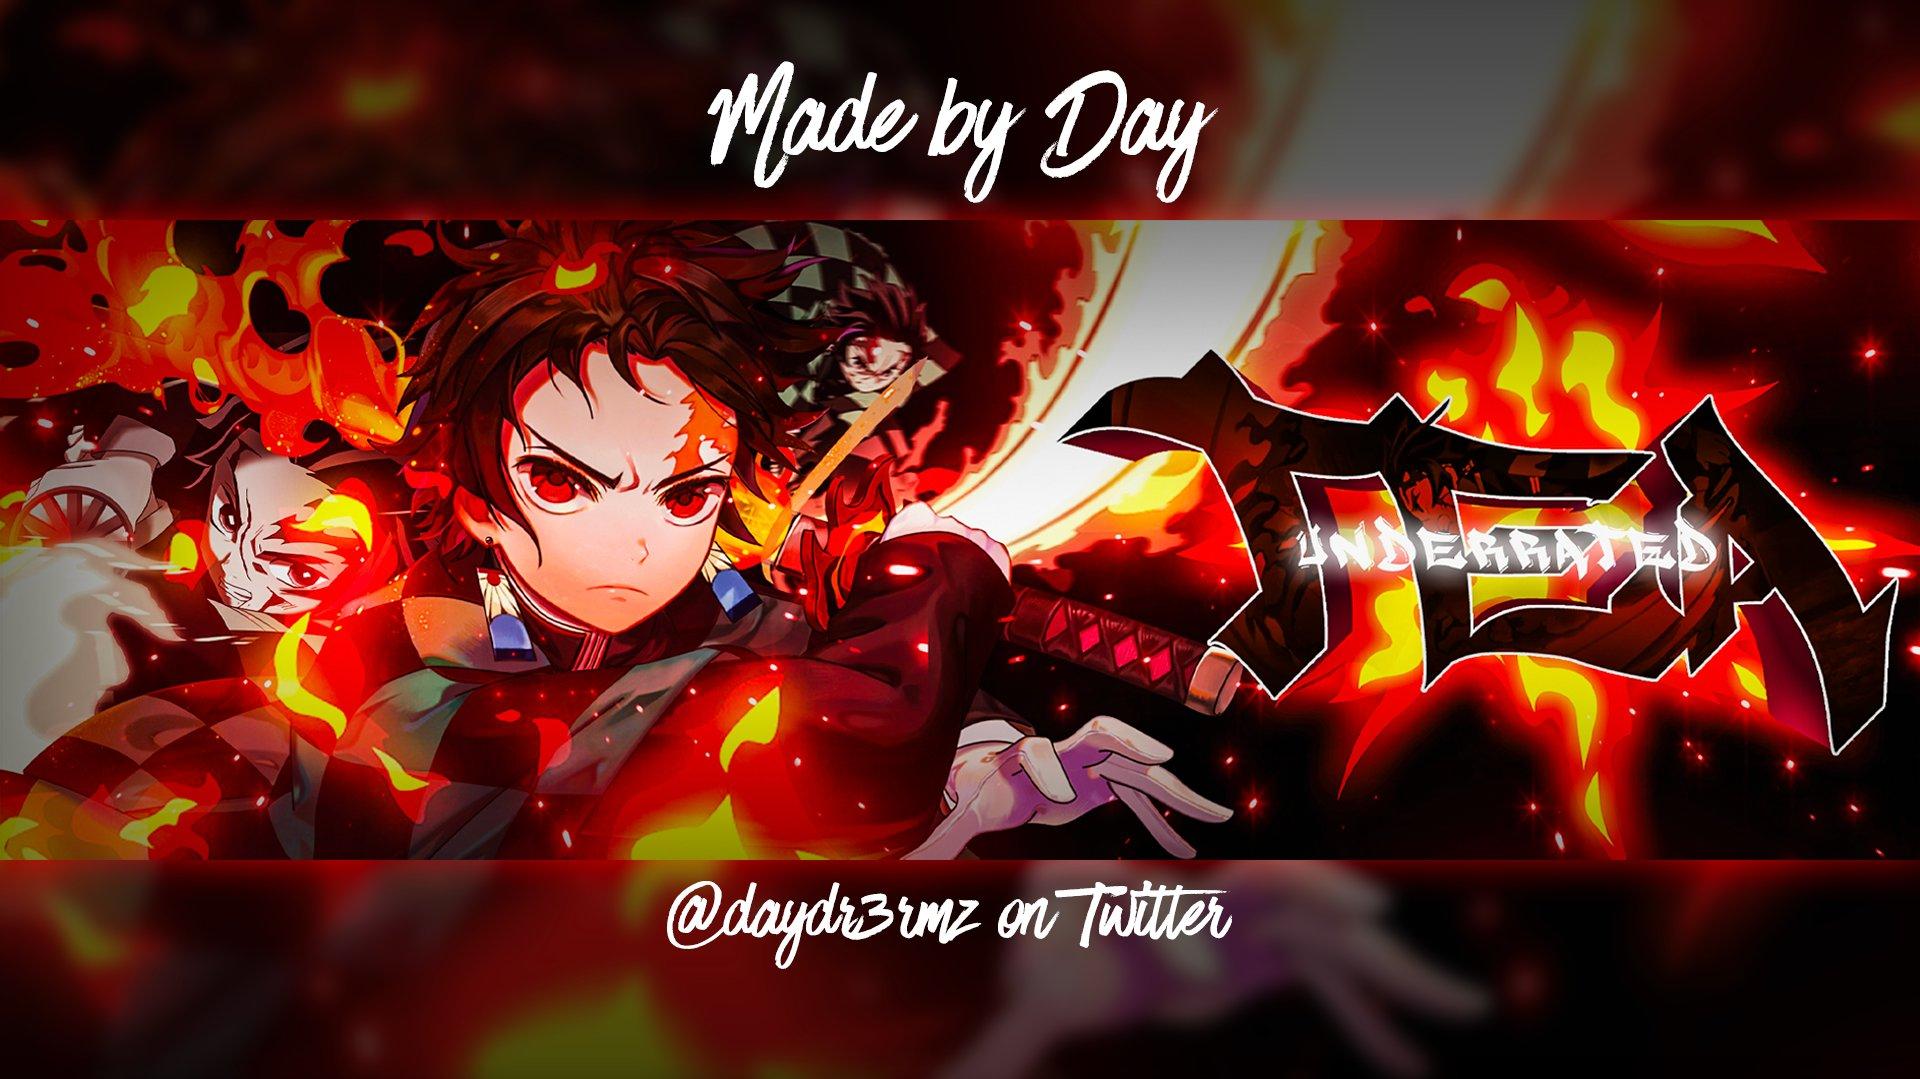 Day Ms Closed On X Tanjiro Header For Underratedtea